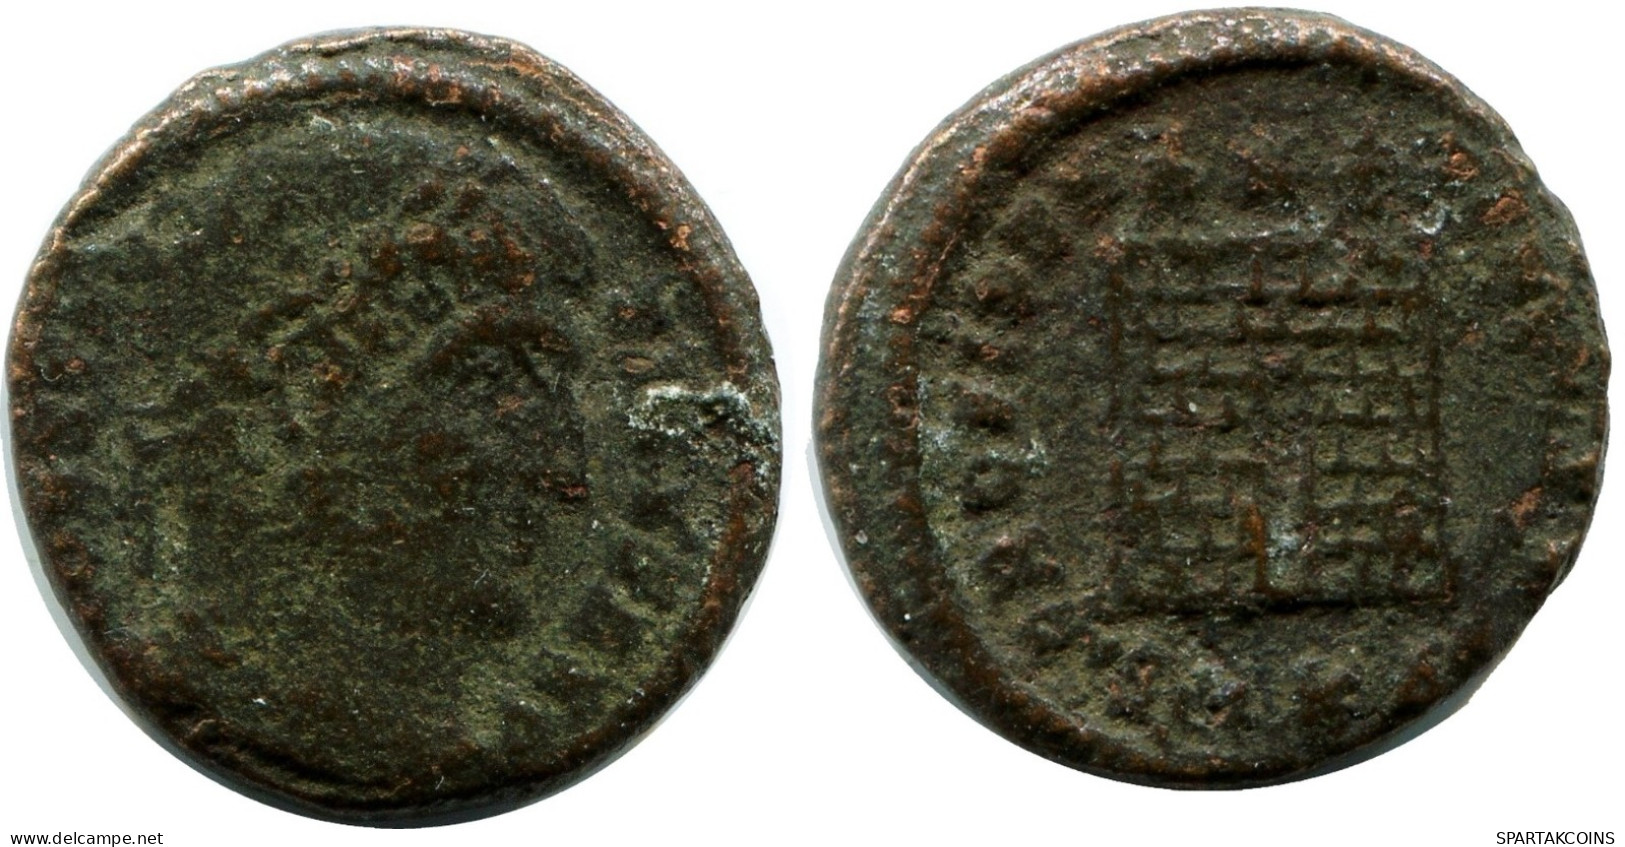 CONSTANTINE I MINTED IN CYZICUS FROM THE ROYAL ONTARIO MUSEUM #ANC11002.14.E.A - El Imperio Christiano (307 / 363)